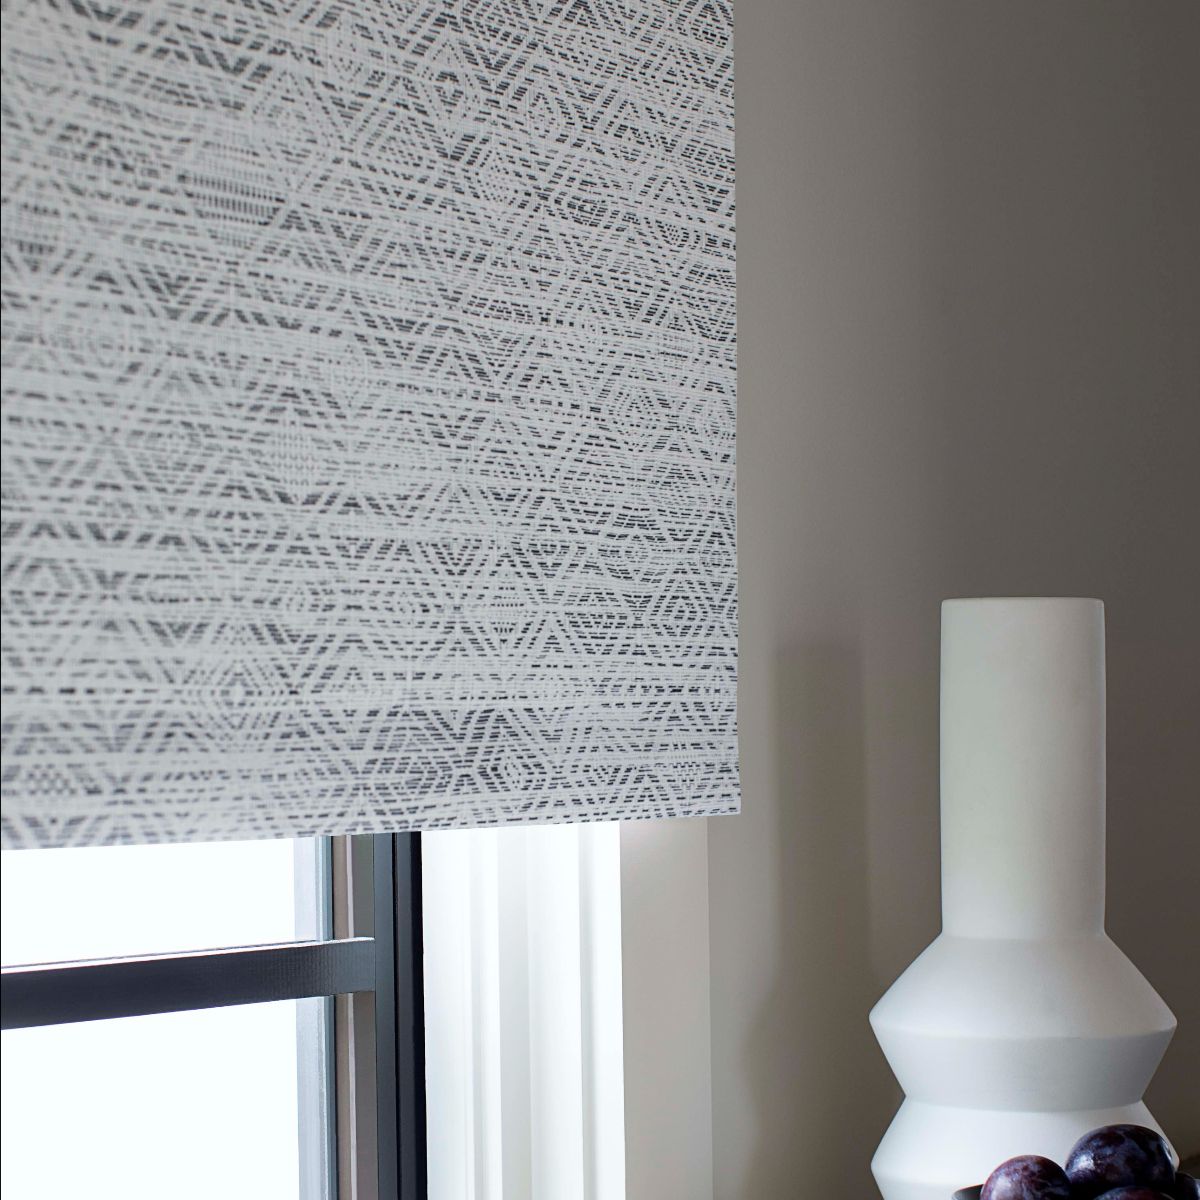 The Shade Store and Chilewich Launch New Blackout Roller Shades - News from Laguna Design Center